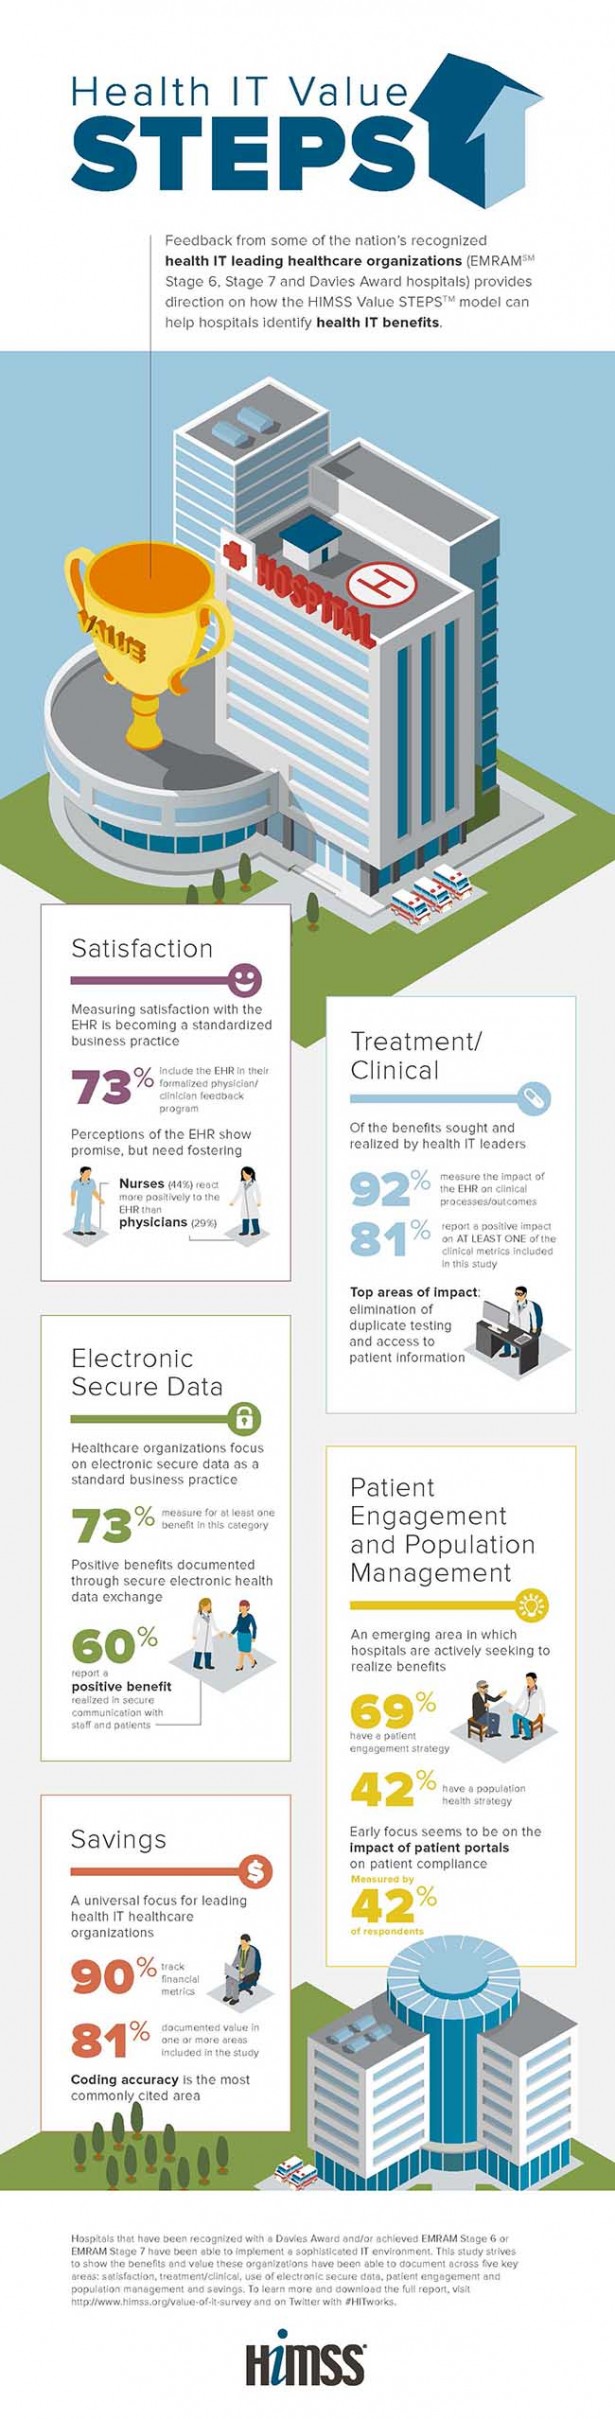 value-of-health-it-infographic